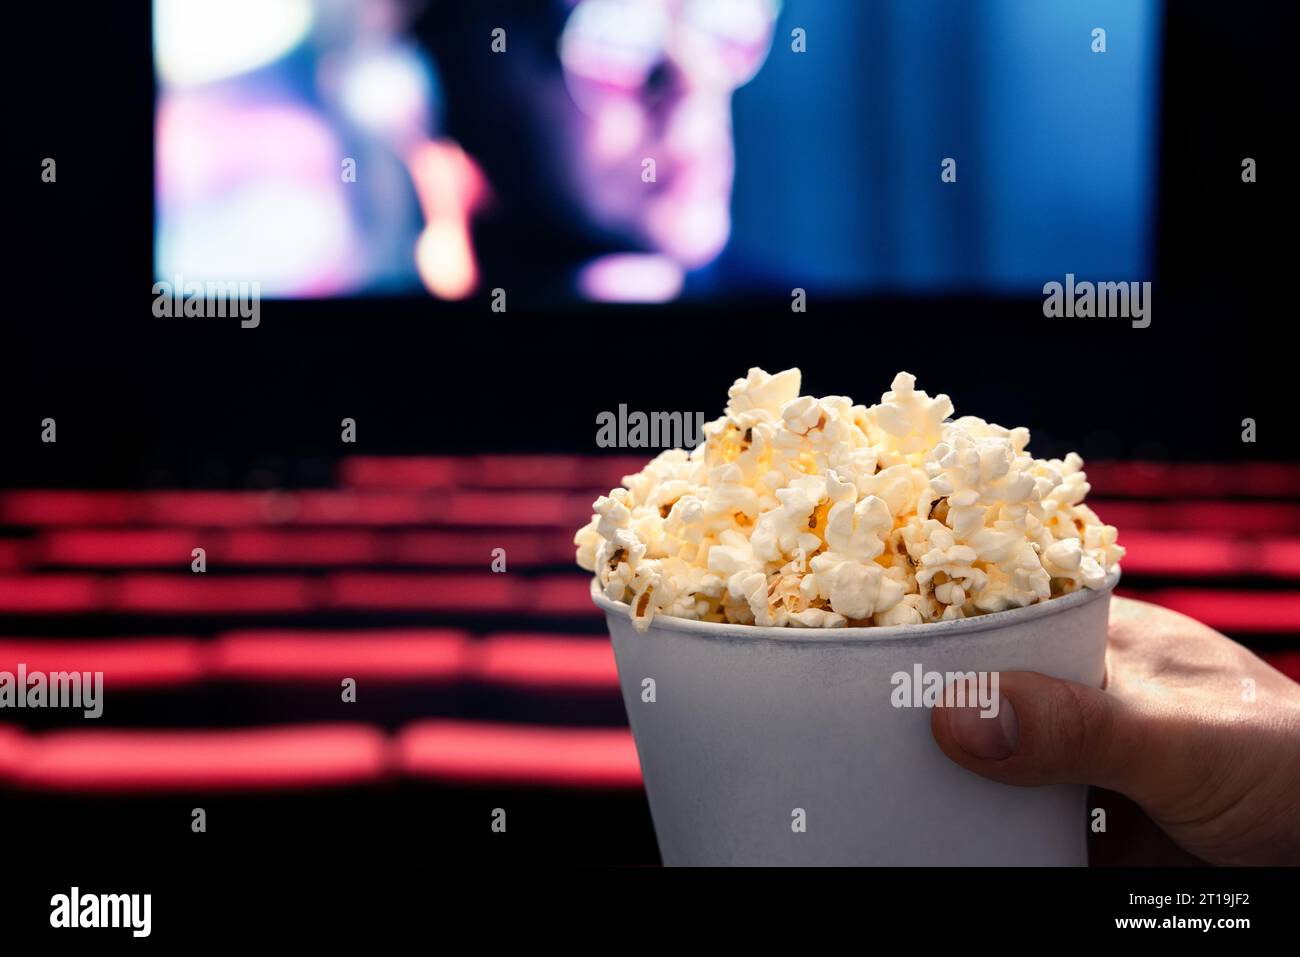 Movies and popcorn. Man holding pop corn box at cinema. Action, thriller or scifi entertainment on screen. Red seats in dark theater. Salty snack. Stock Photo